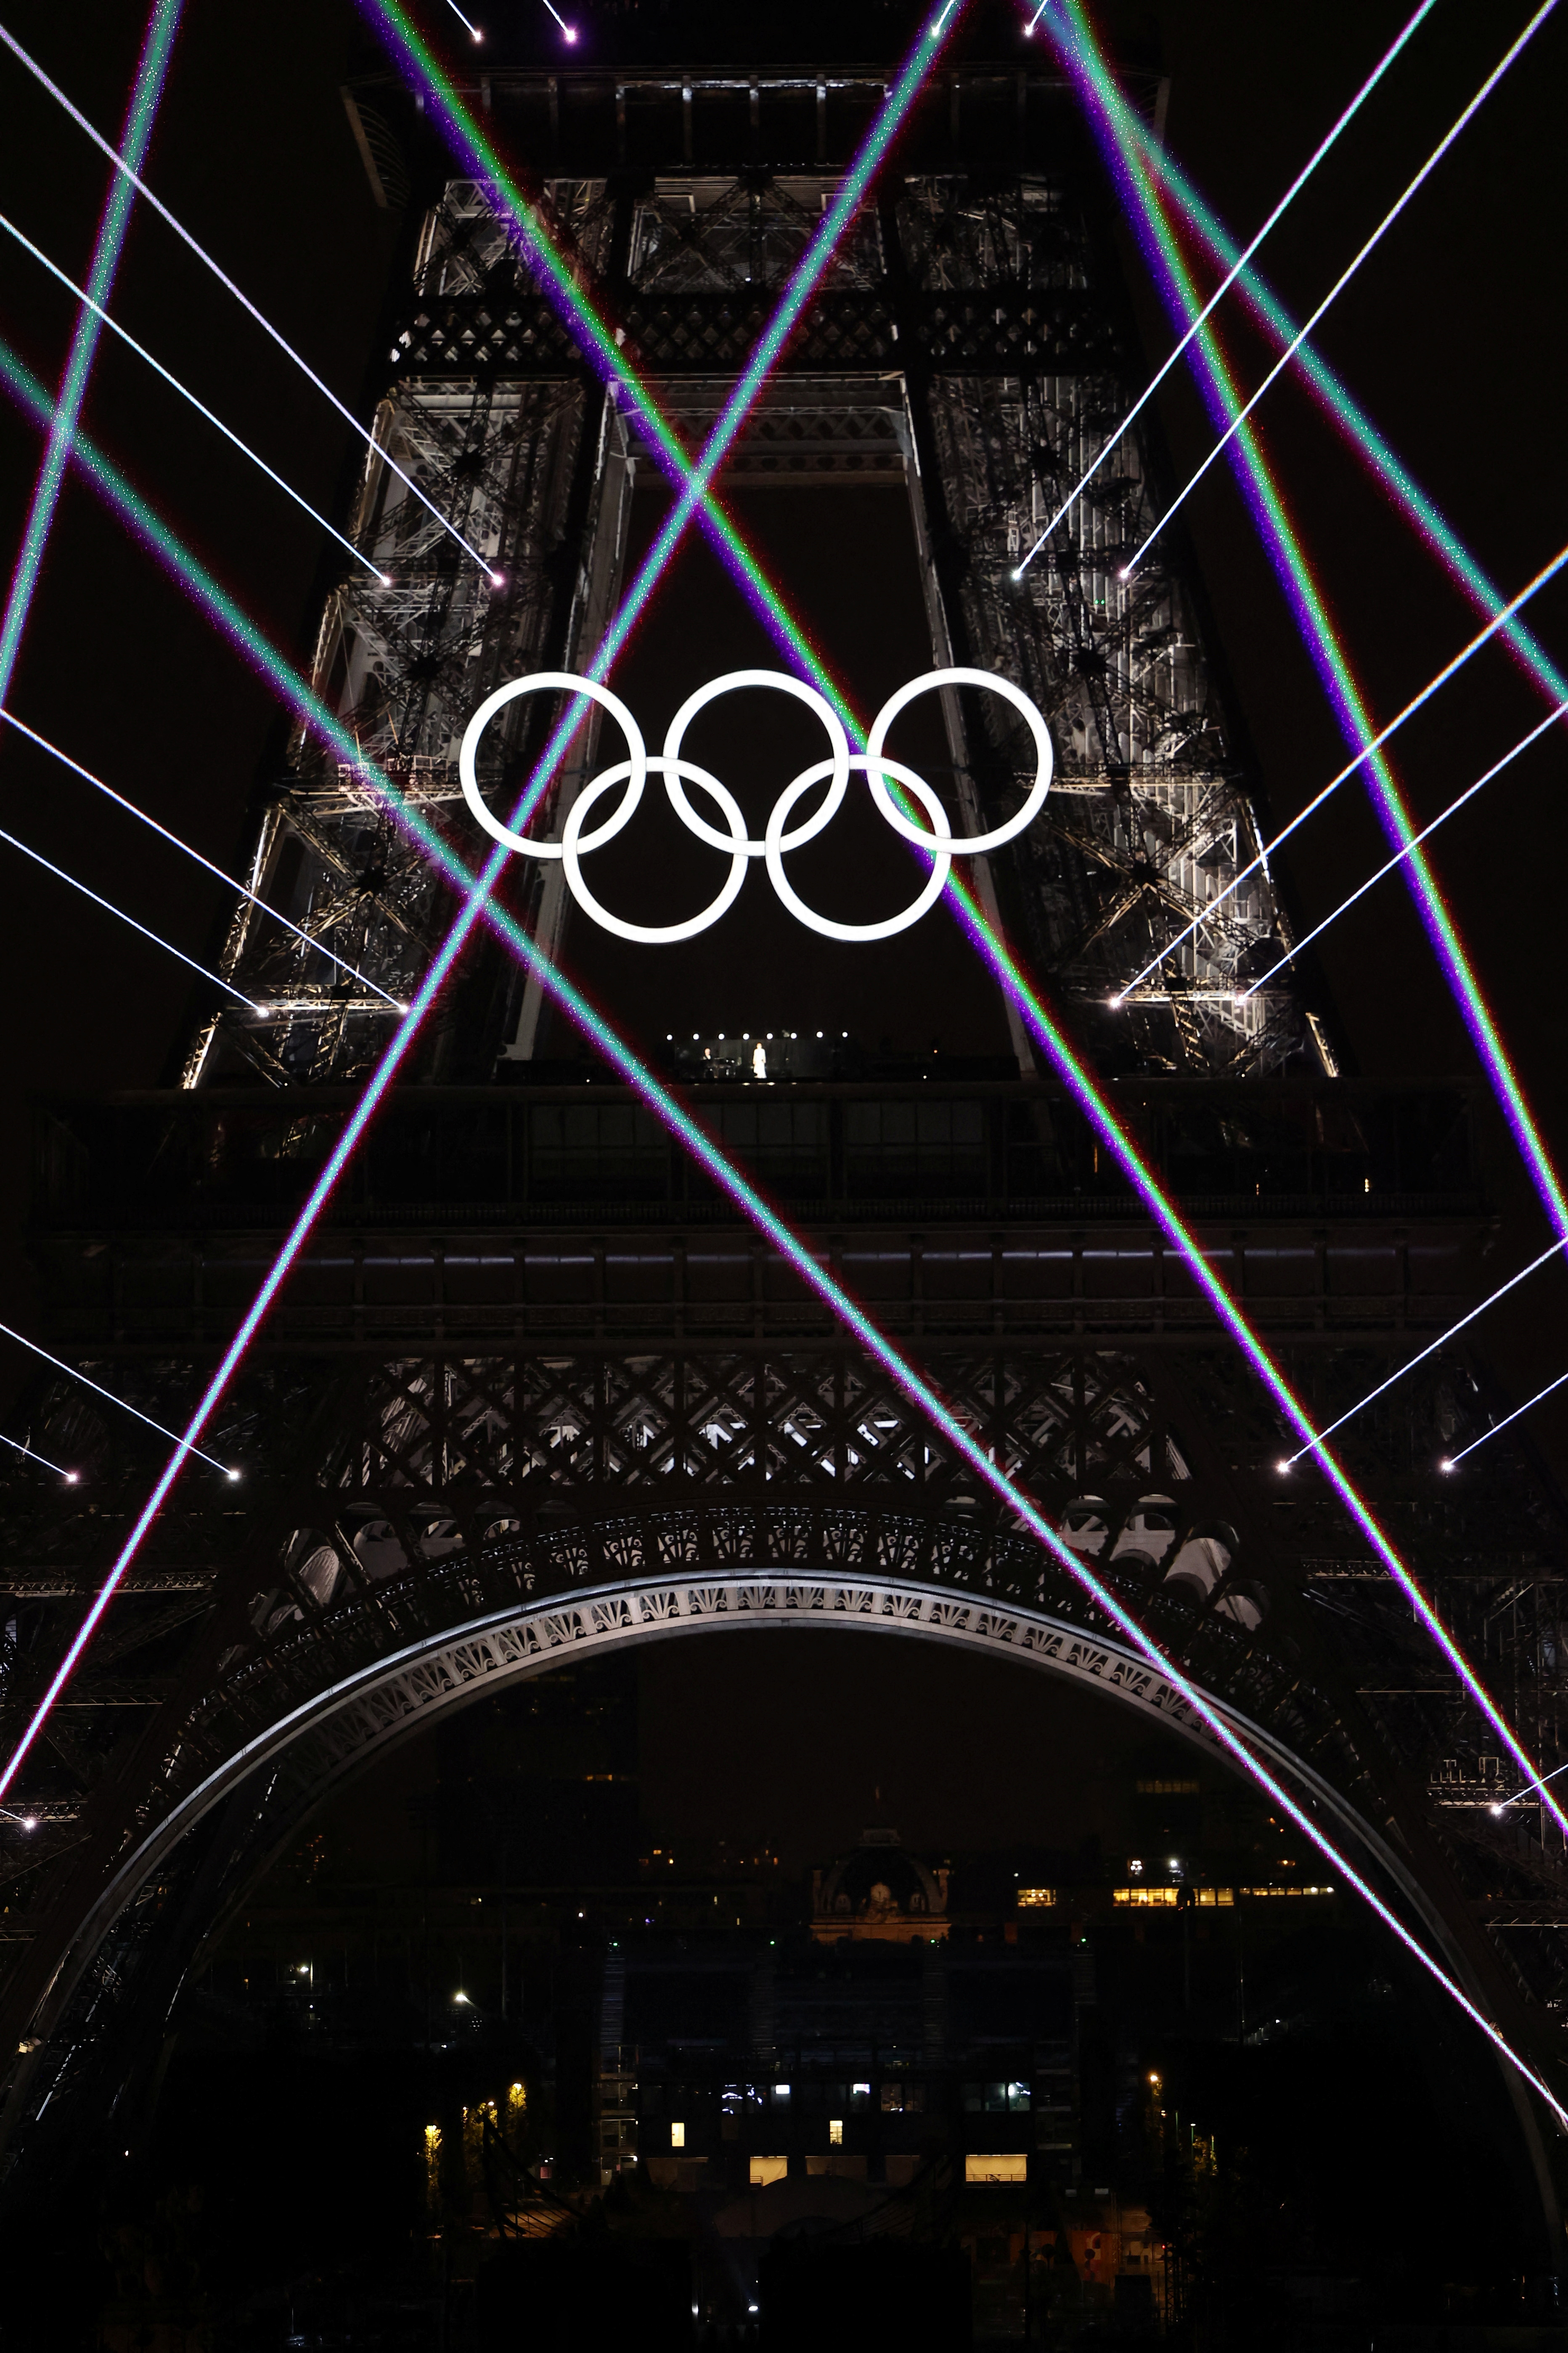 Celine Dion performs on the Eiffel Tower to close the opening ceremony of the Olympic Games in Paris, 2024